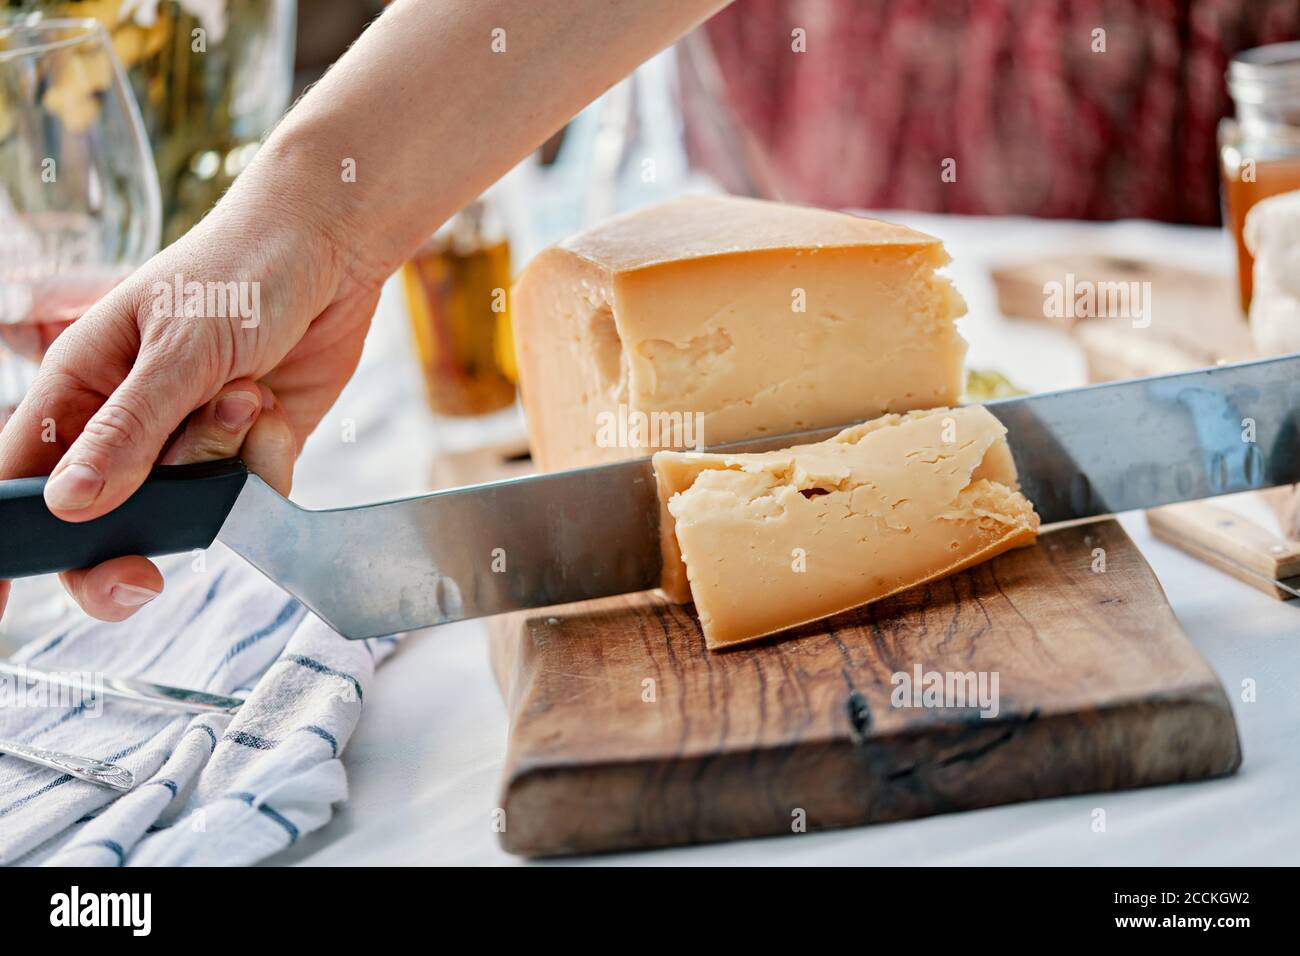 Hands cutting cheese on wood Stock Photo